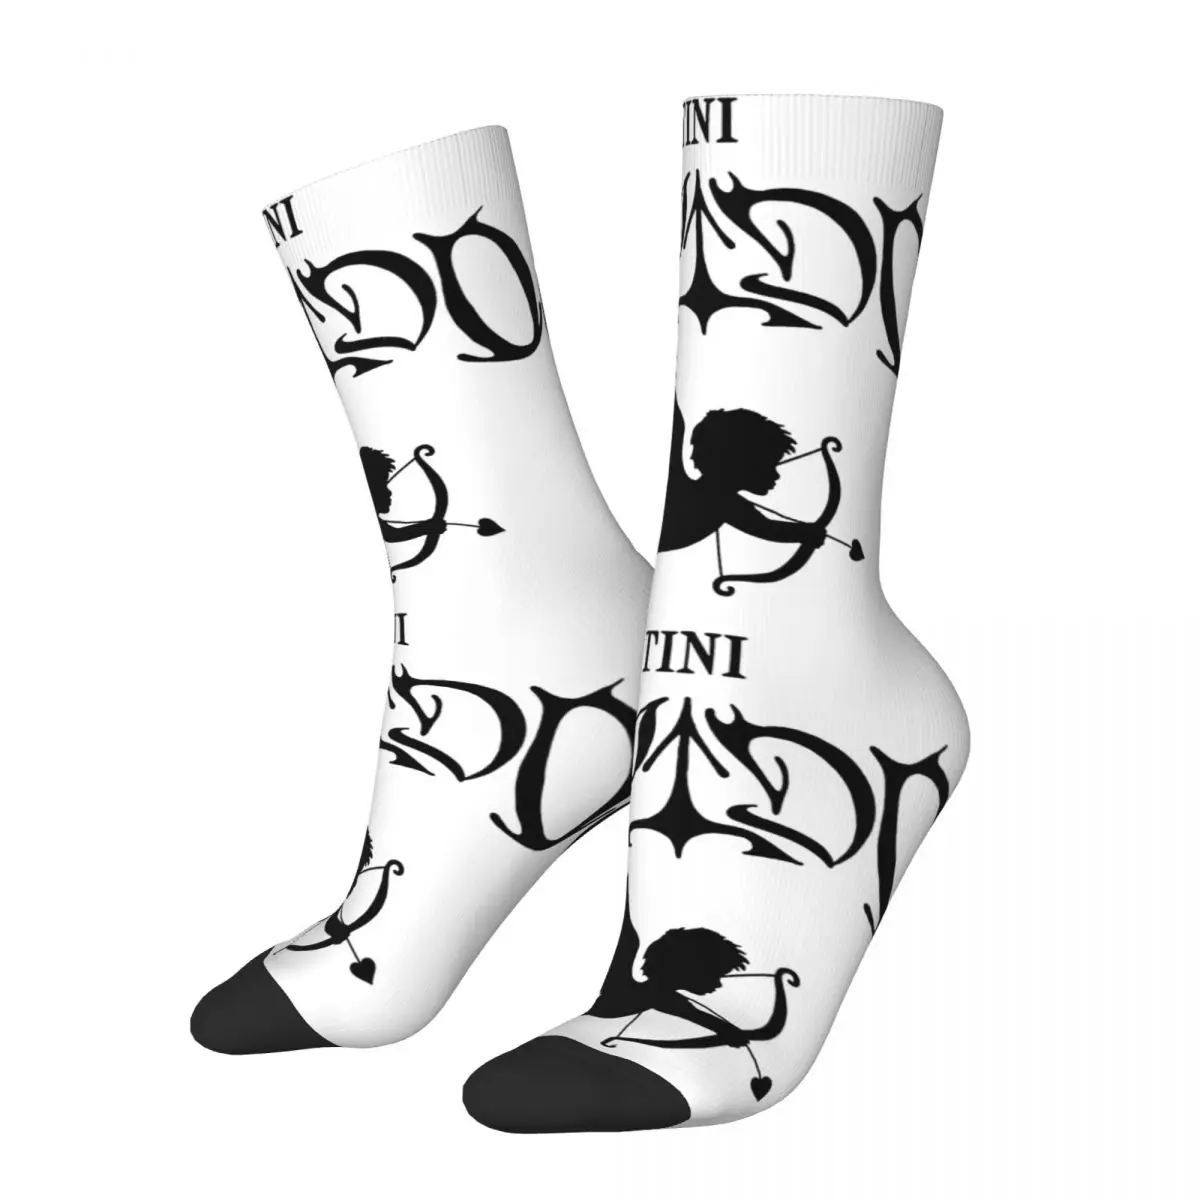 

Female Male Tini Stoessel - Cupido With An Angel Socks Cute Fashion Vintage Socks Novelty Product Middle TubeSocks Gift Idea